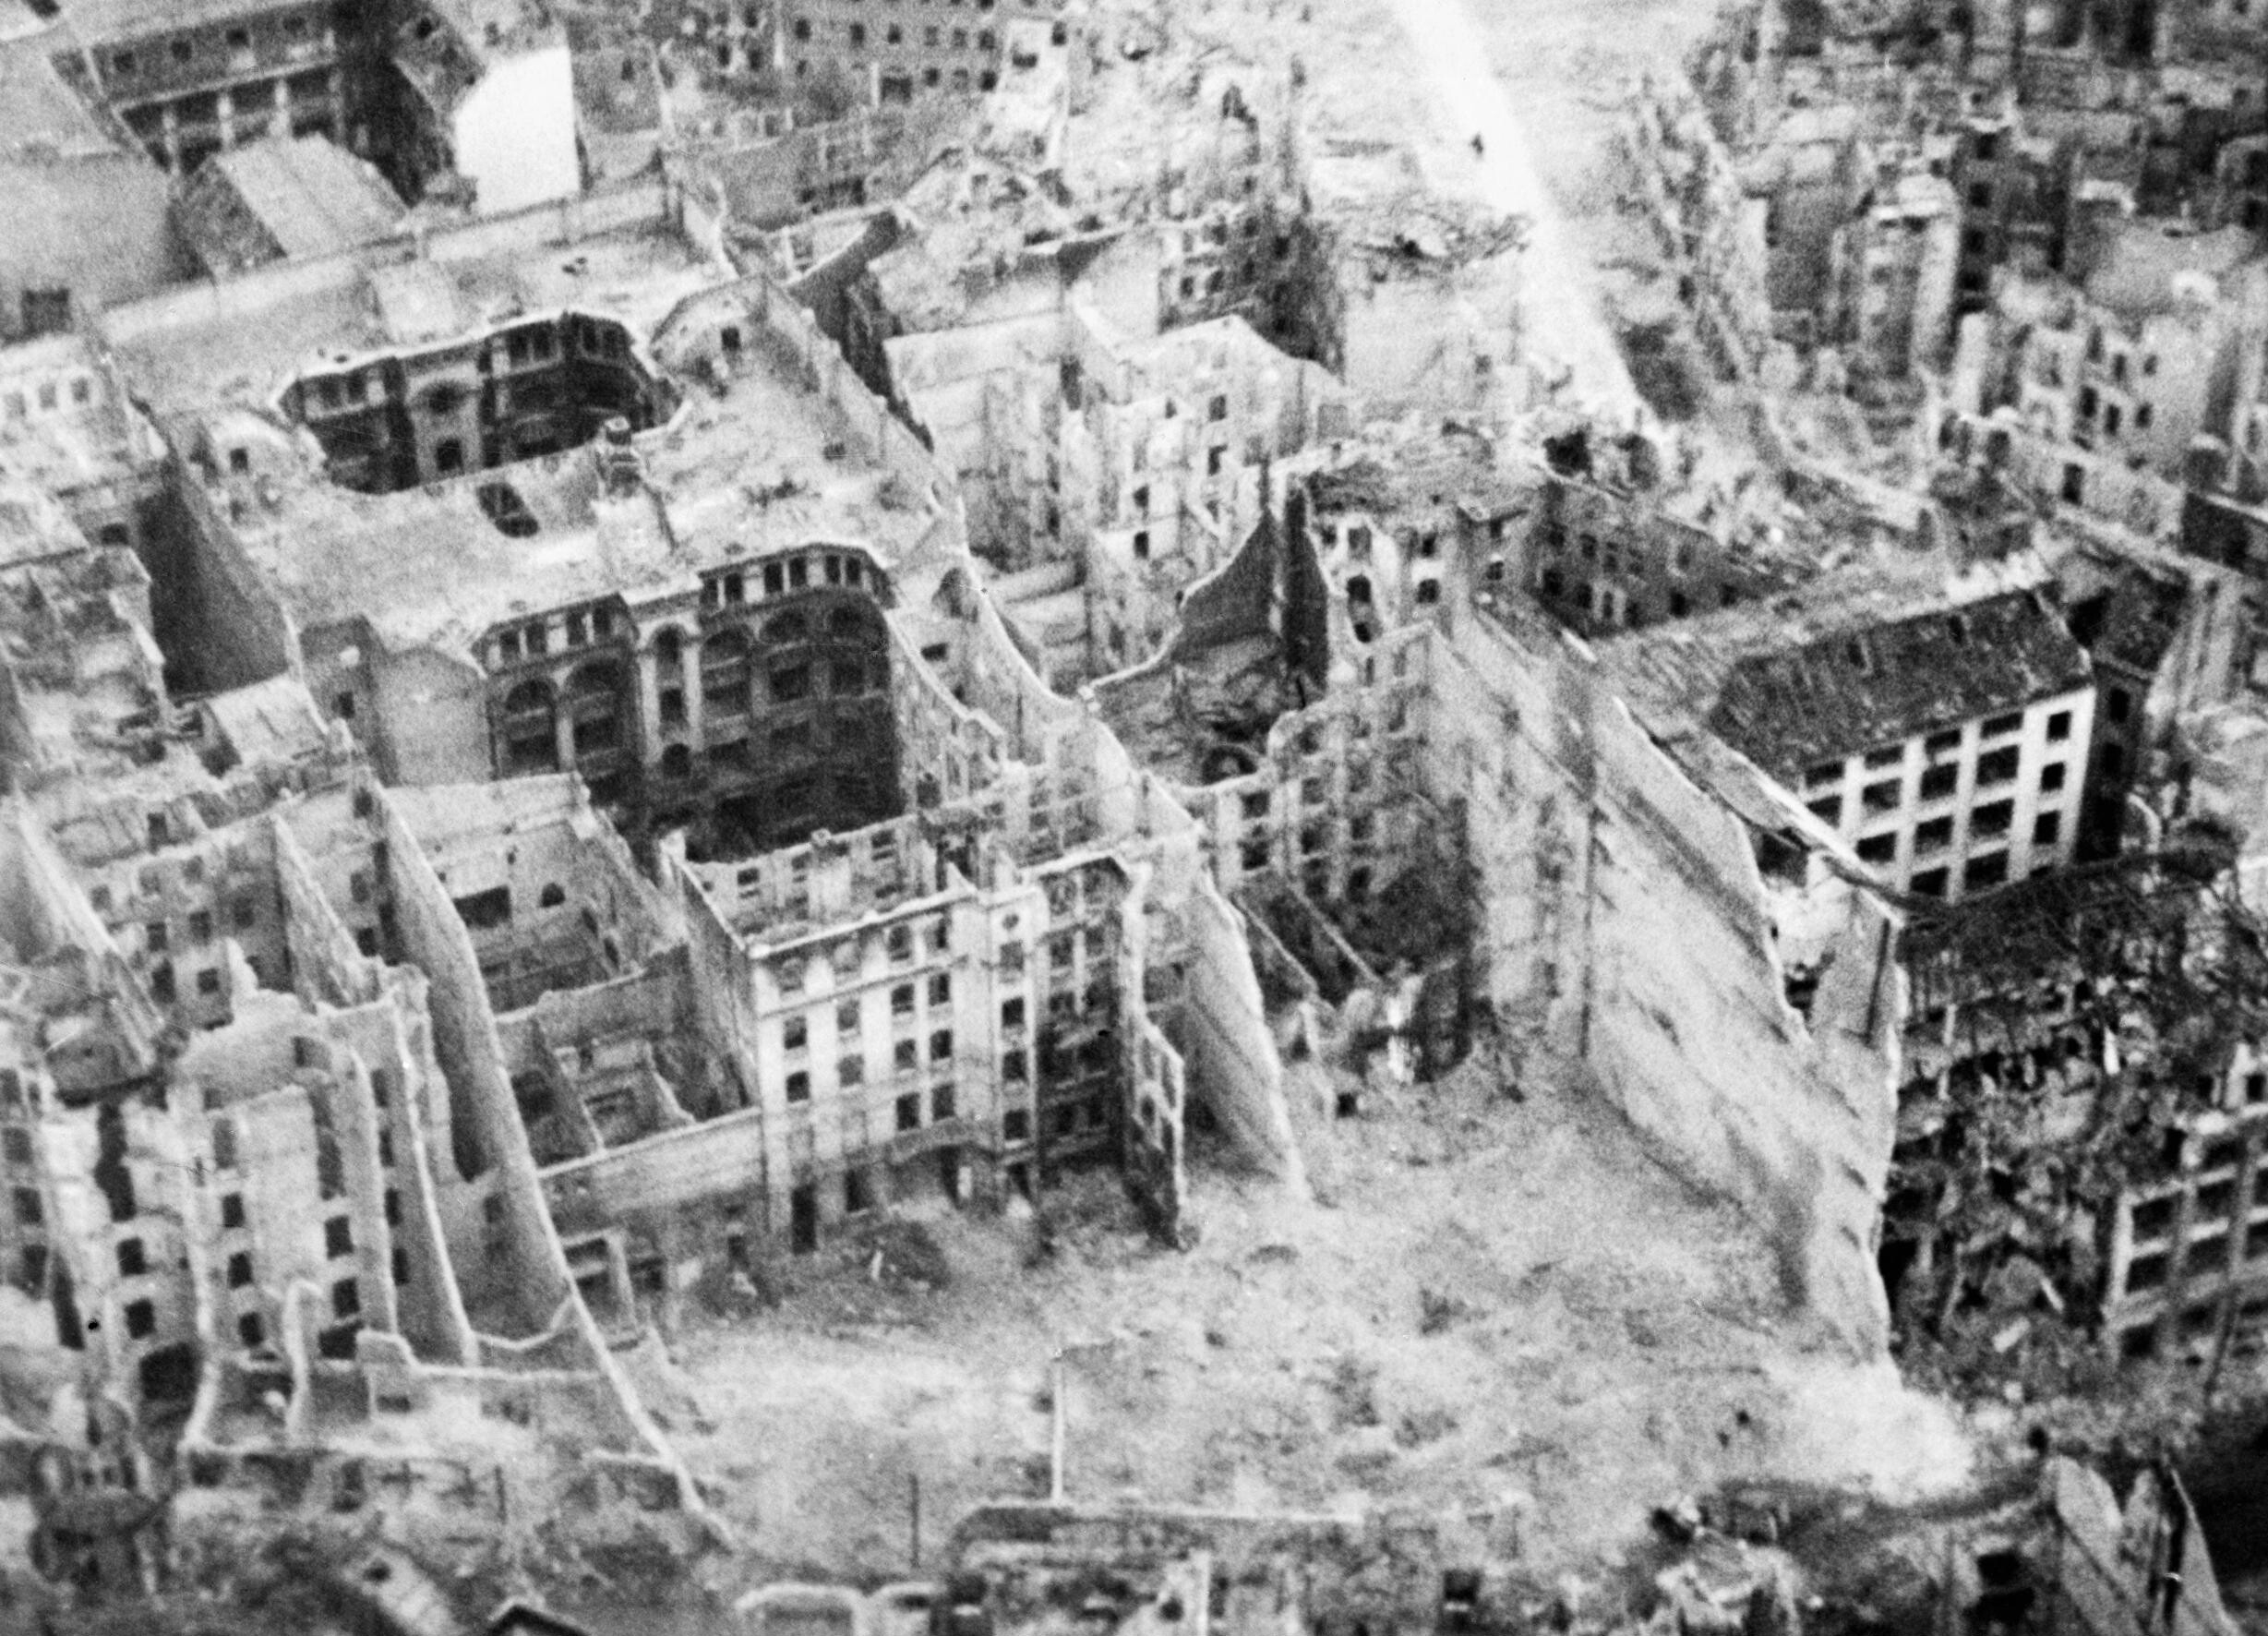 Berlin-_the_Capture_and_Aftermath_of_War_1945-1947_C5284.jpg